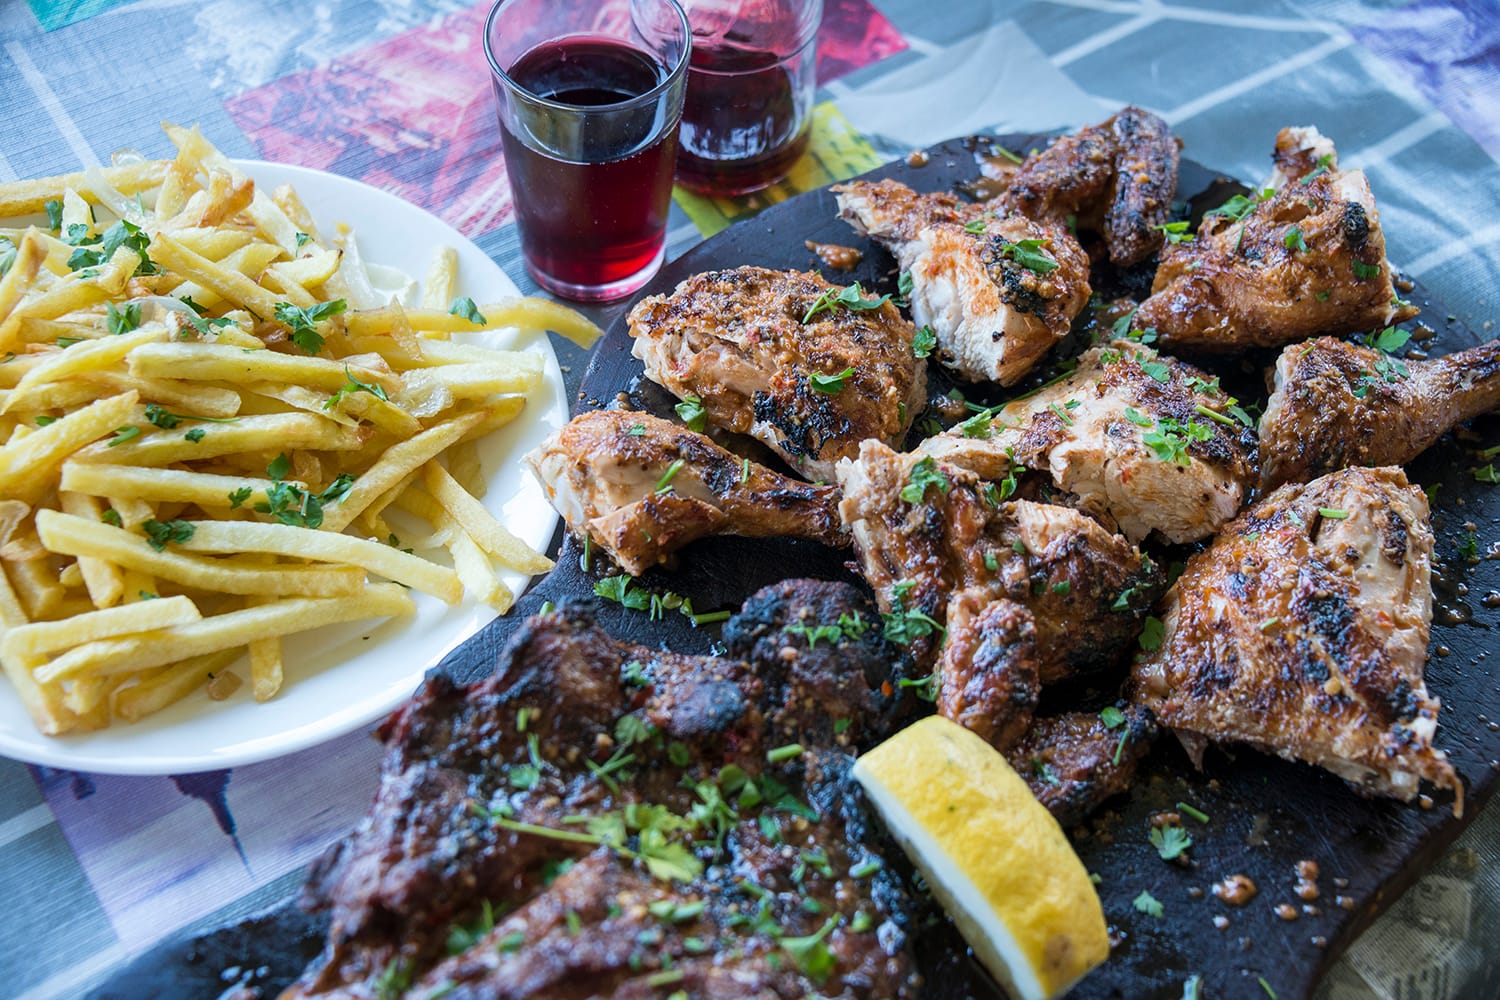 Grilled meat tray with chips and red wine in a restaurant in Tenerife, Canary Islands